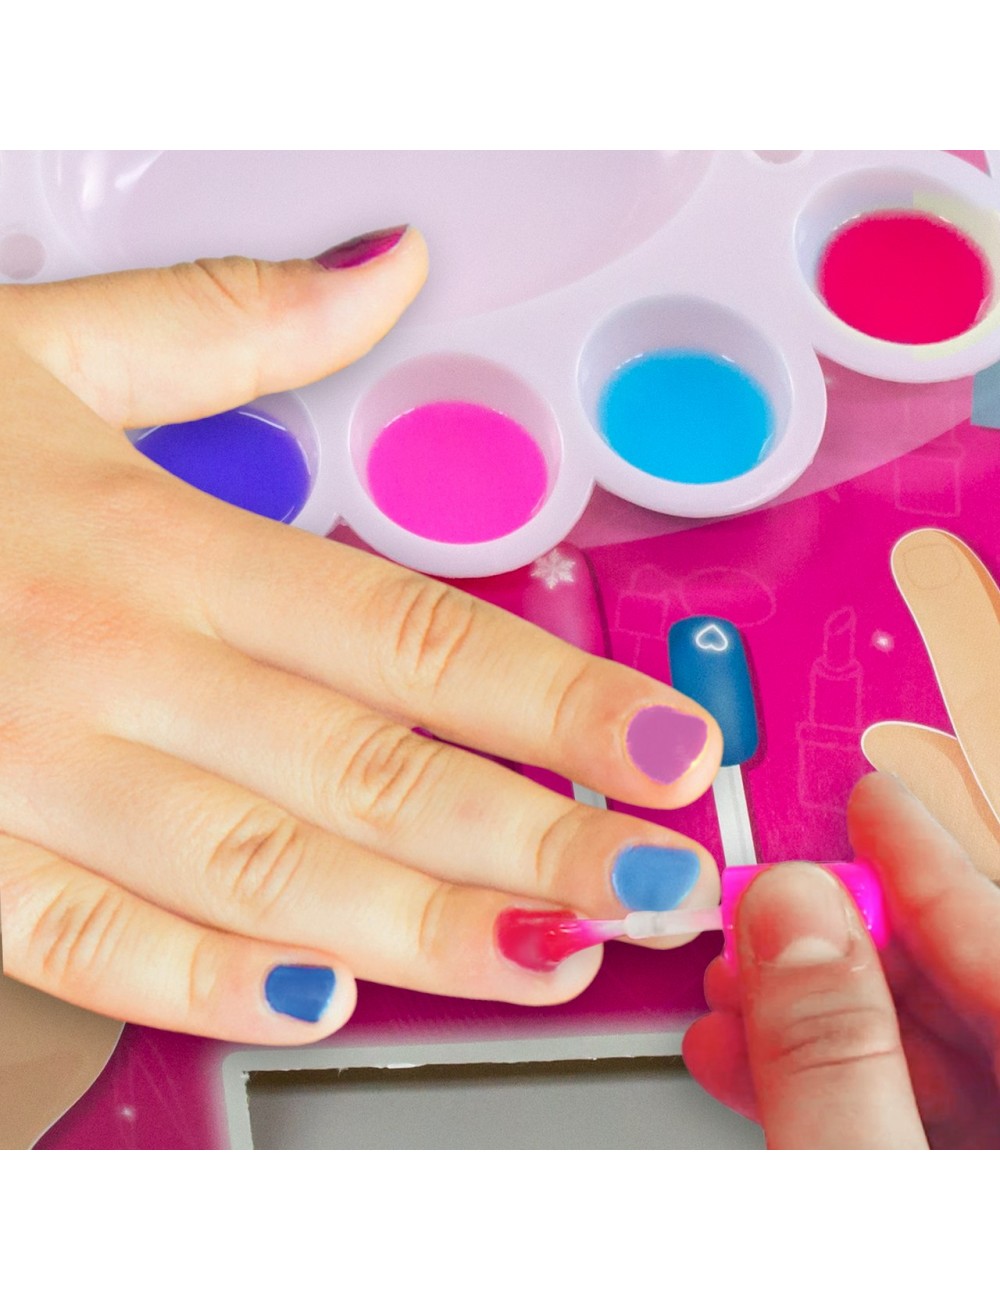 Manicure Factory Game for Girls